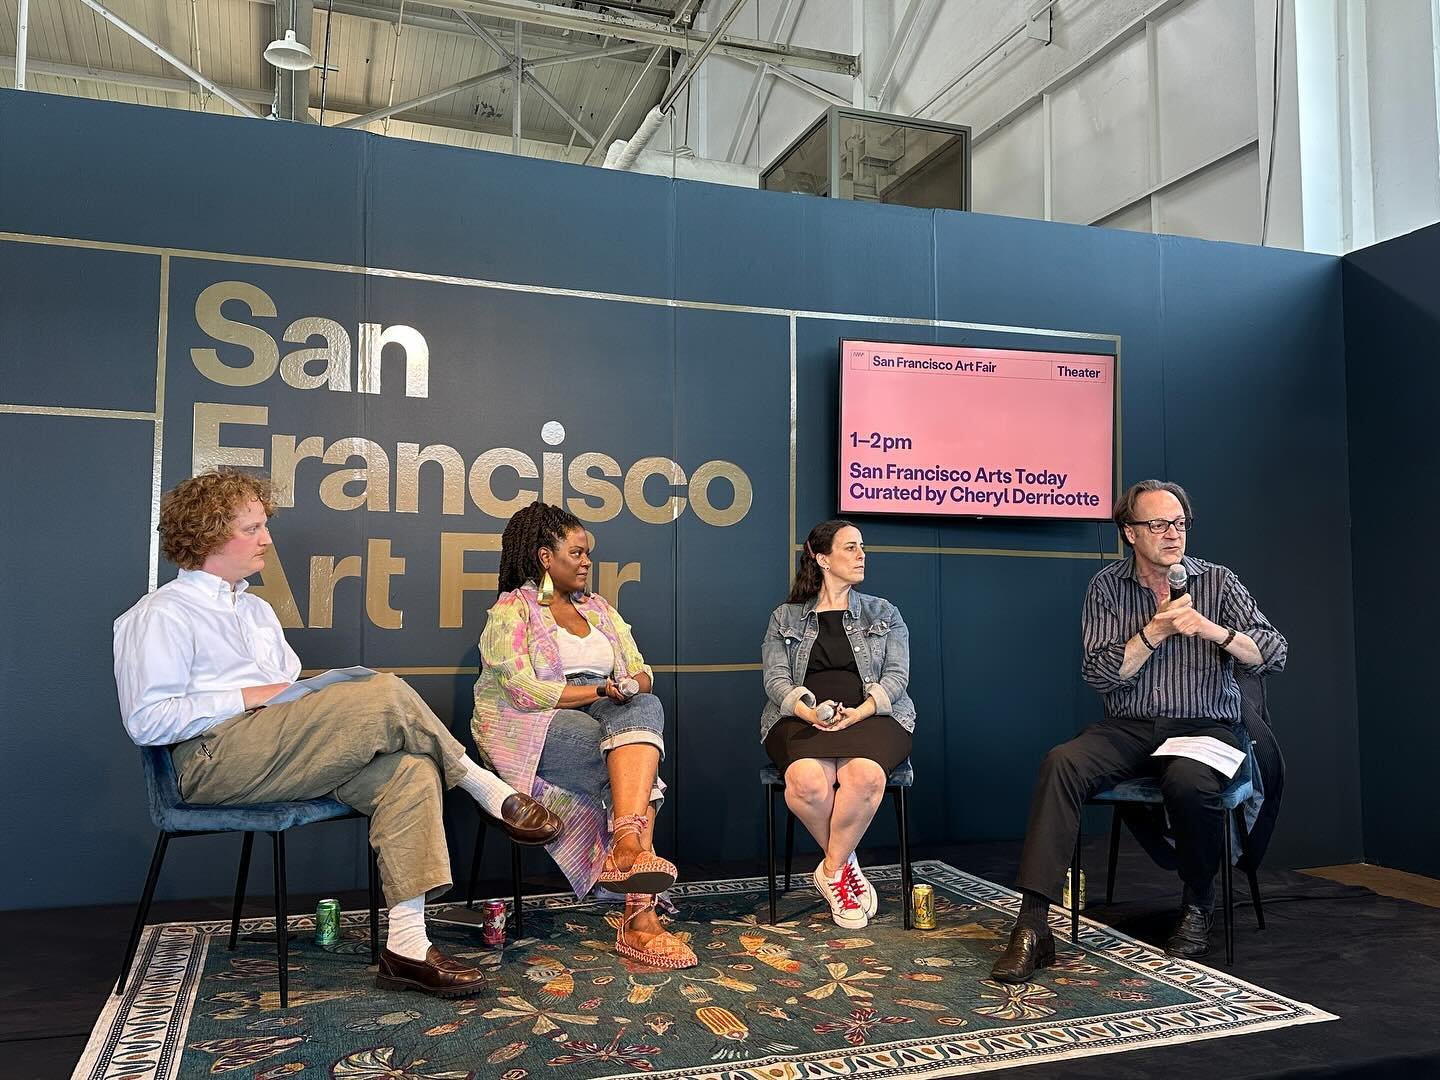 Excellent panel discussion on SF art today with @keyjolee @lopesshana #timothyburgard moderated by @maxblueofficial curated by @cherylderricottestudio @artmarketproductions 

.
.
.
#sfartfair #sanfrancisco #contemporaryart #art